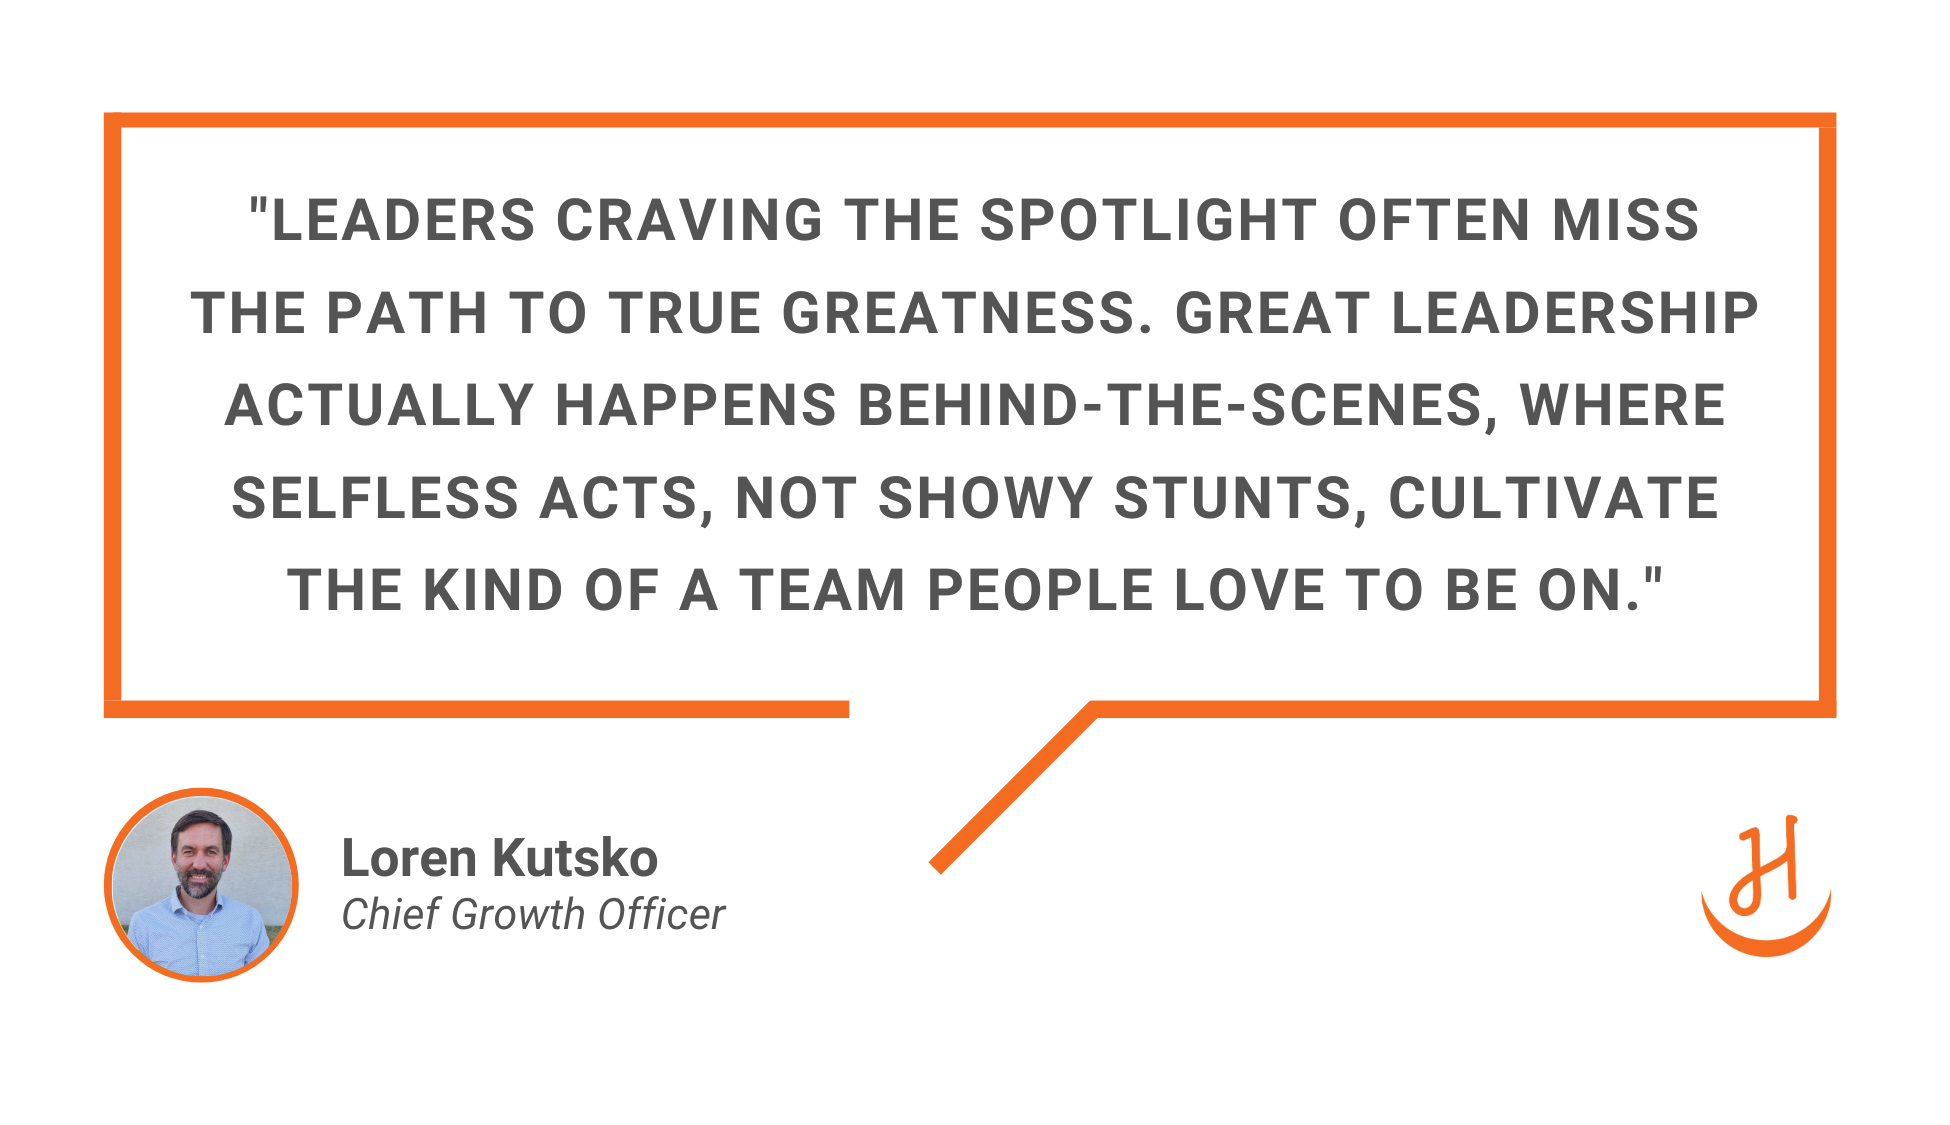 Quote by Loren Kutsko, Chief Growth Officer at Happy, which reads "Leaders craving the spotlight often miss the path to true greatness. Great leadership actually happens behind-the-scenes, where selfless acts, not showy stunts, cultivate the kind of a team people love to be on"